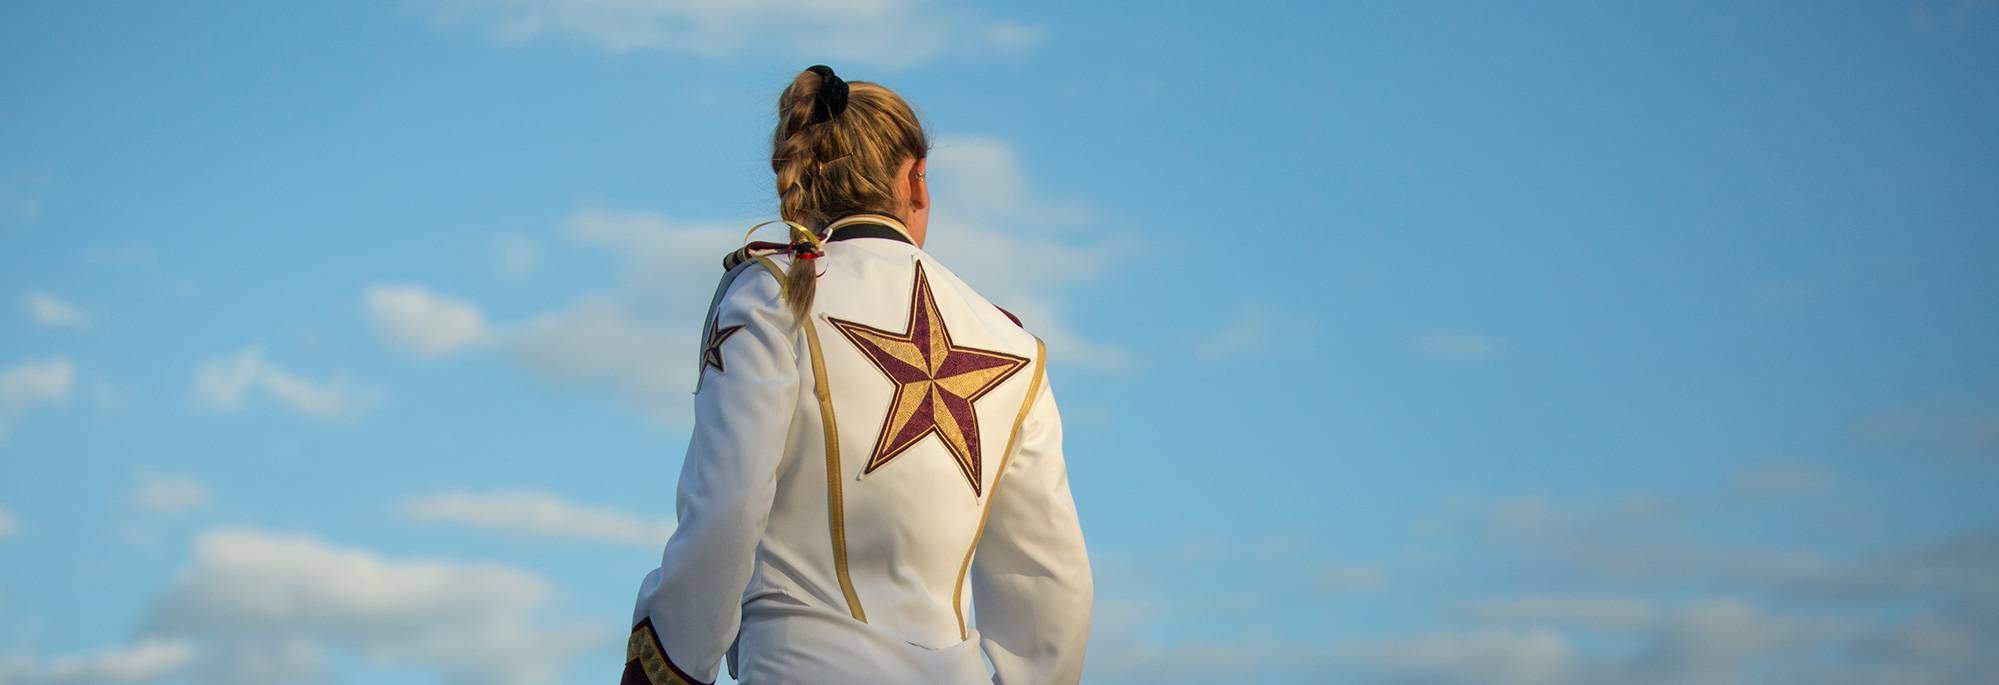 drum major Bethany Smith looks off into distance with blue sky in background